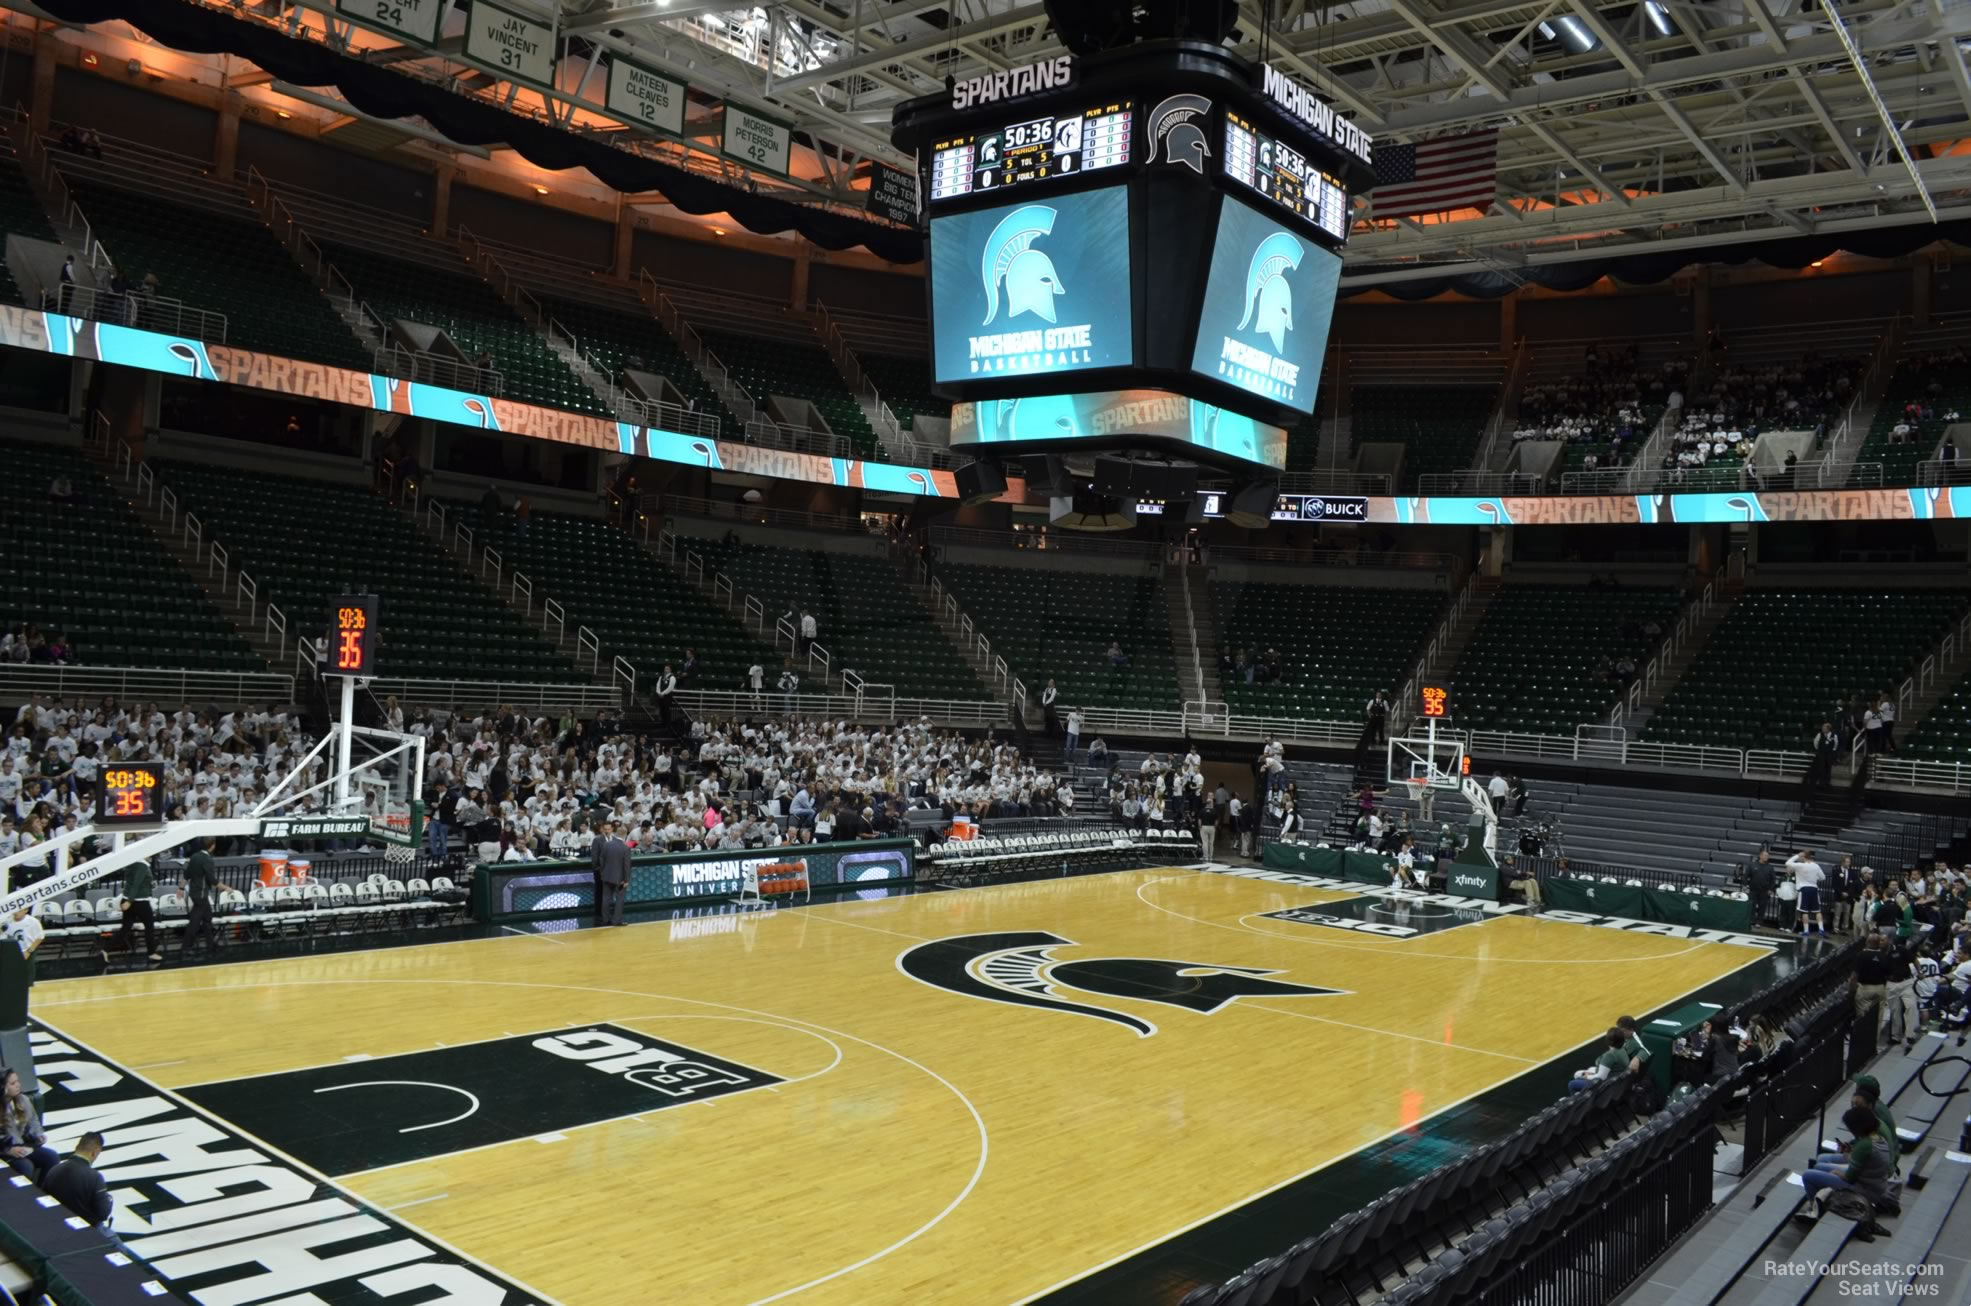 section 133, row 13 seat view  - breslin center